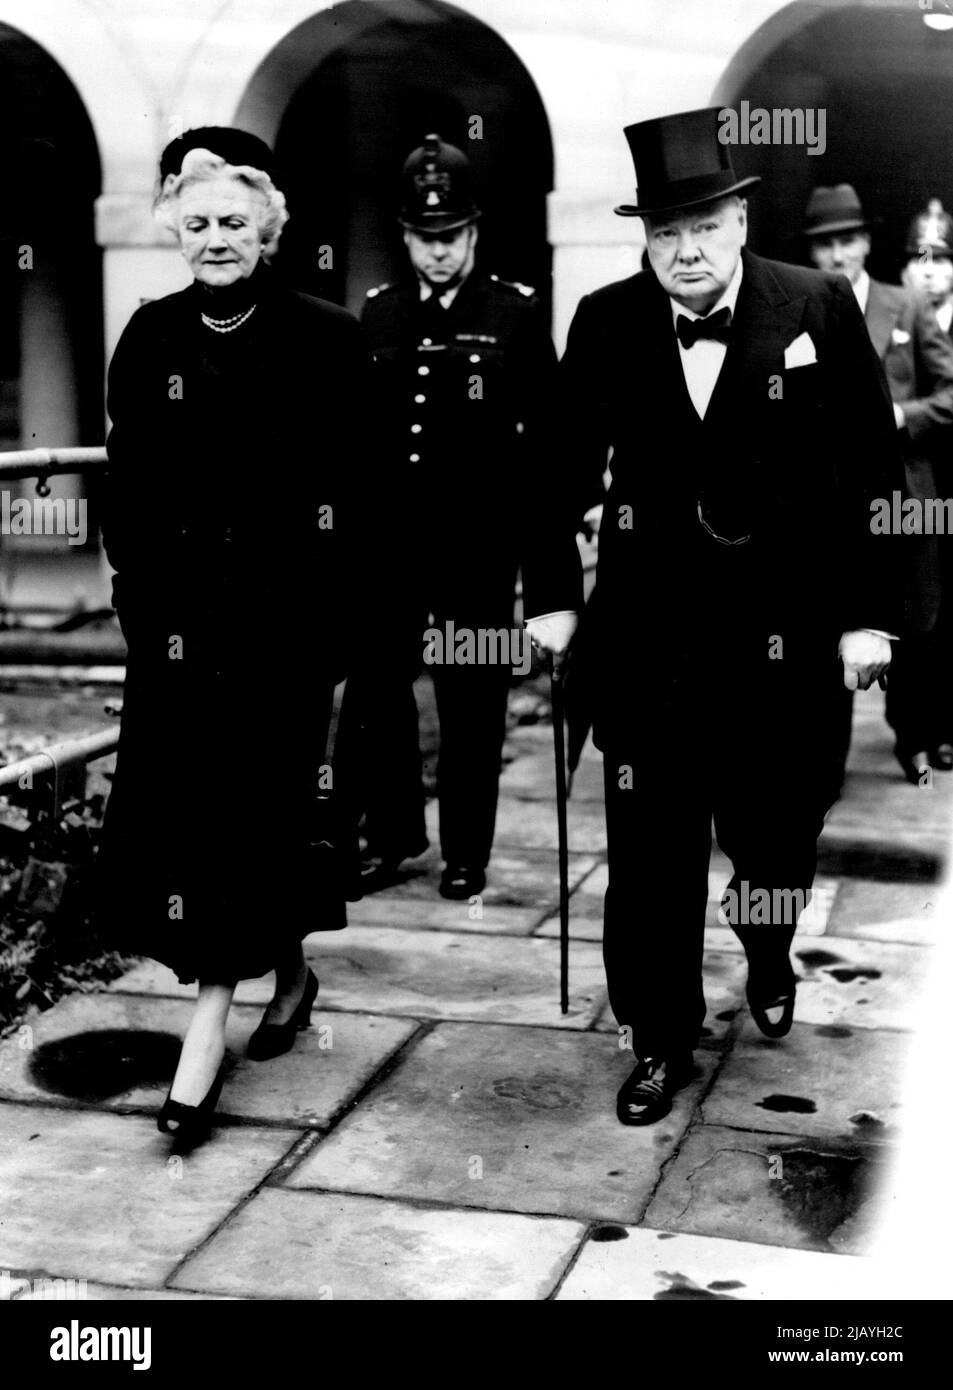 Sir Winston Churchill At Temple Church: Sir Winston and Lady Churchill arrive at the temple church for the memorial service. Sir Winston Churchill and Lady Churchill attended a memorial service to lord Asquith at the famous temple church in the city today. October 05, 1954. (Photo by Paul Popper, Paul Popper Ltd.). Stock Photo